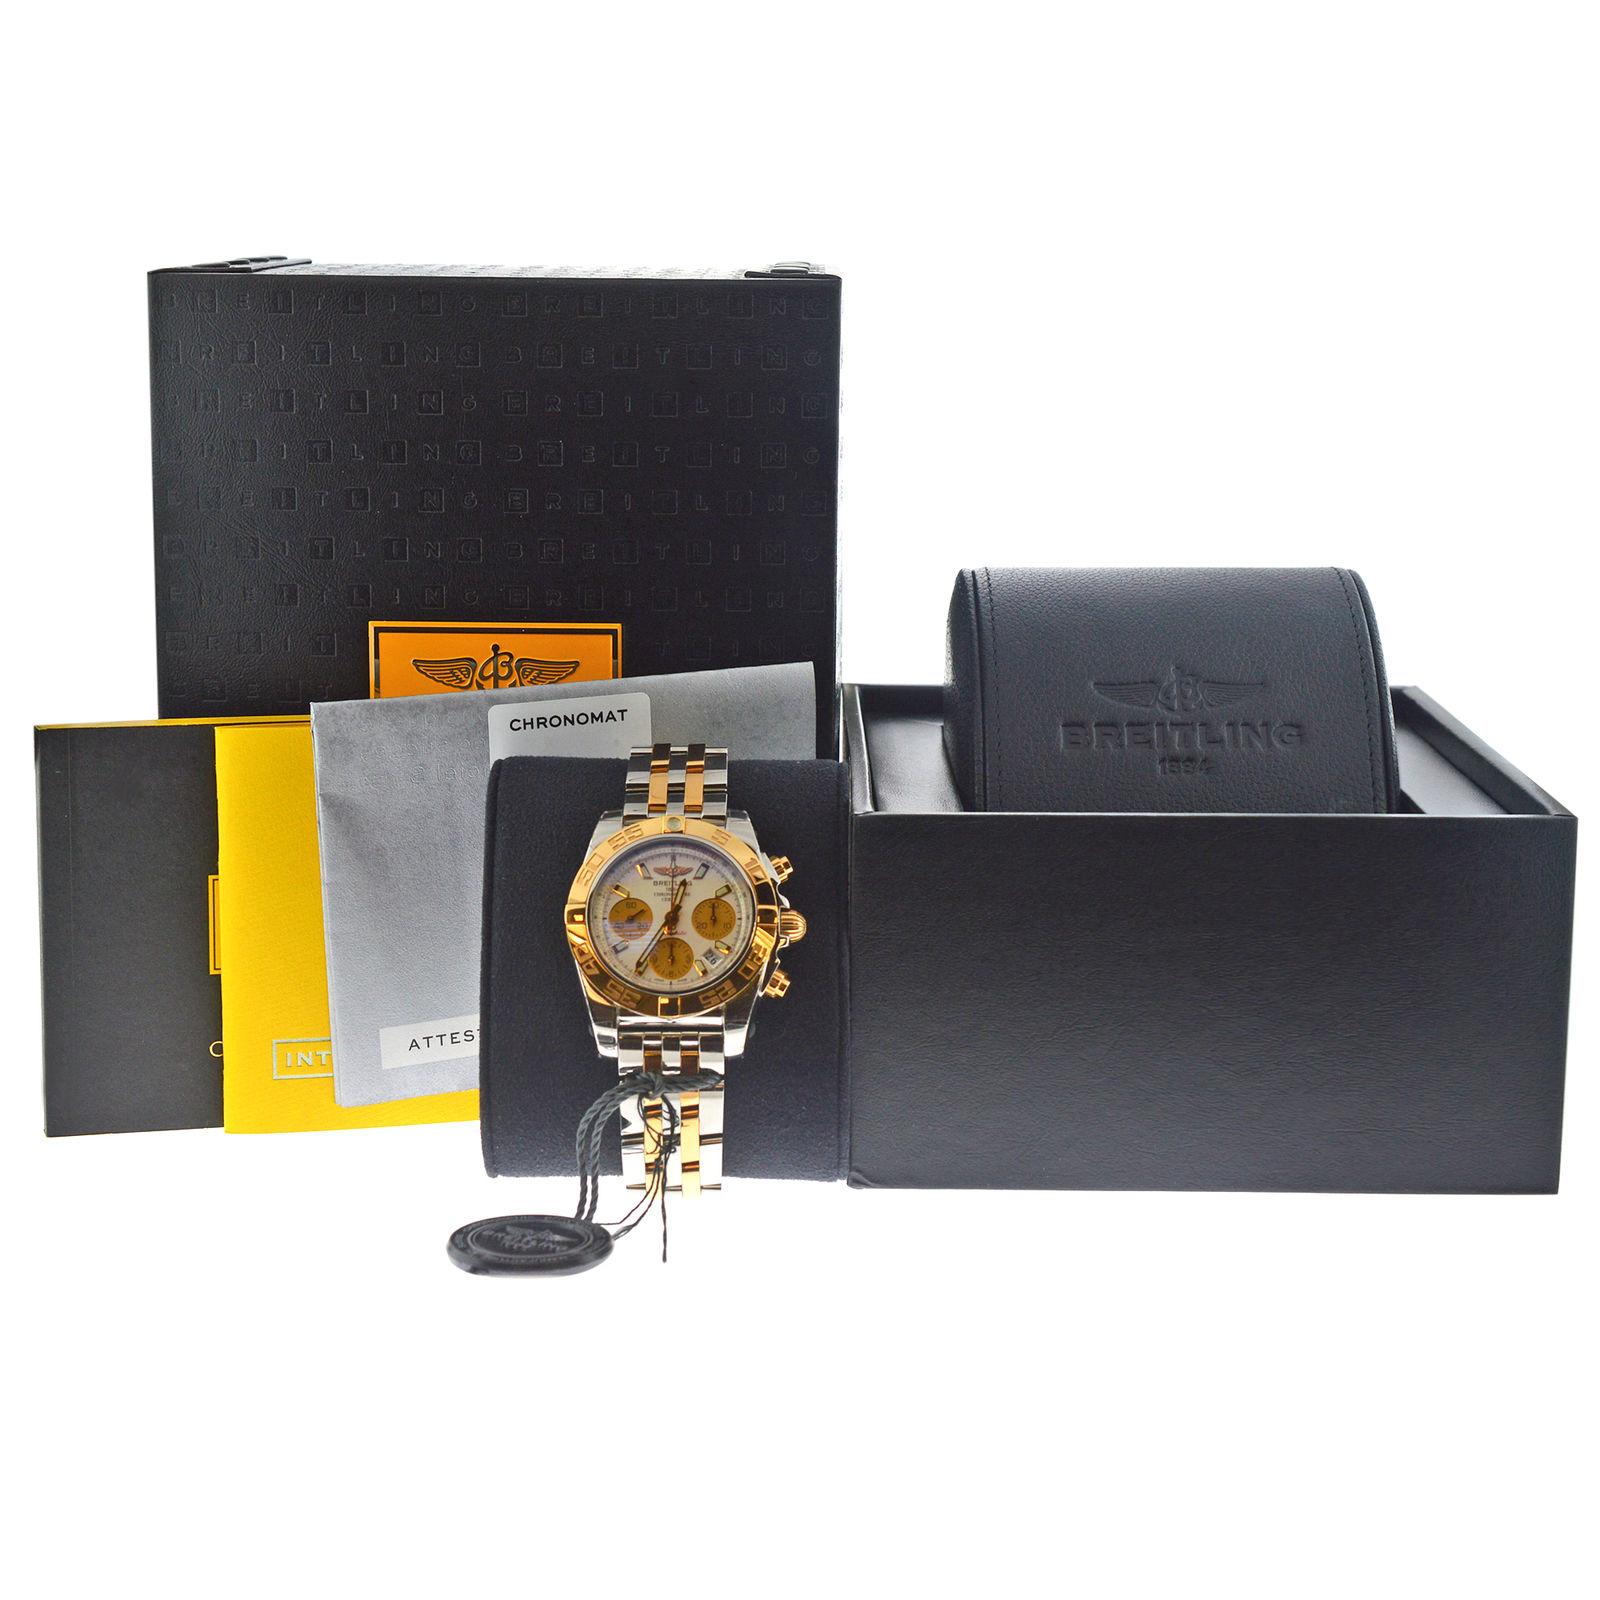 Brand	Breitling
Model	Chronomat 41 CB0140
Gender	Men
Condition	New store display
Movement	Swiss Automatic 
Case Material	Stainless Steel & 18K Rose Gold
Bracelet / Strap Material	
Stainless Steel &18K Rose Gold

Clasp / Buckle Material	
Stainless